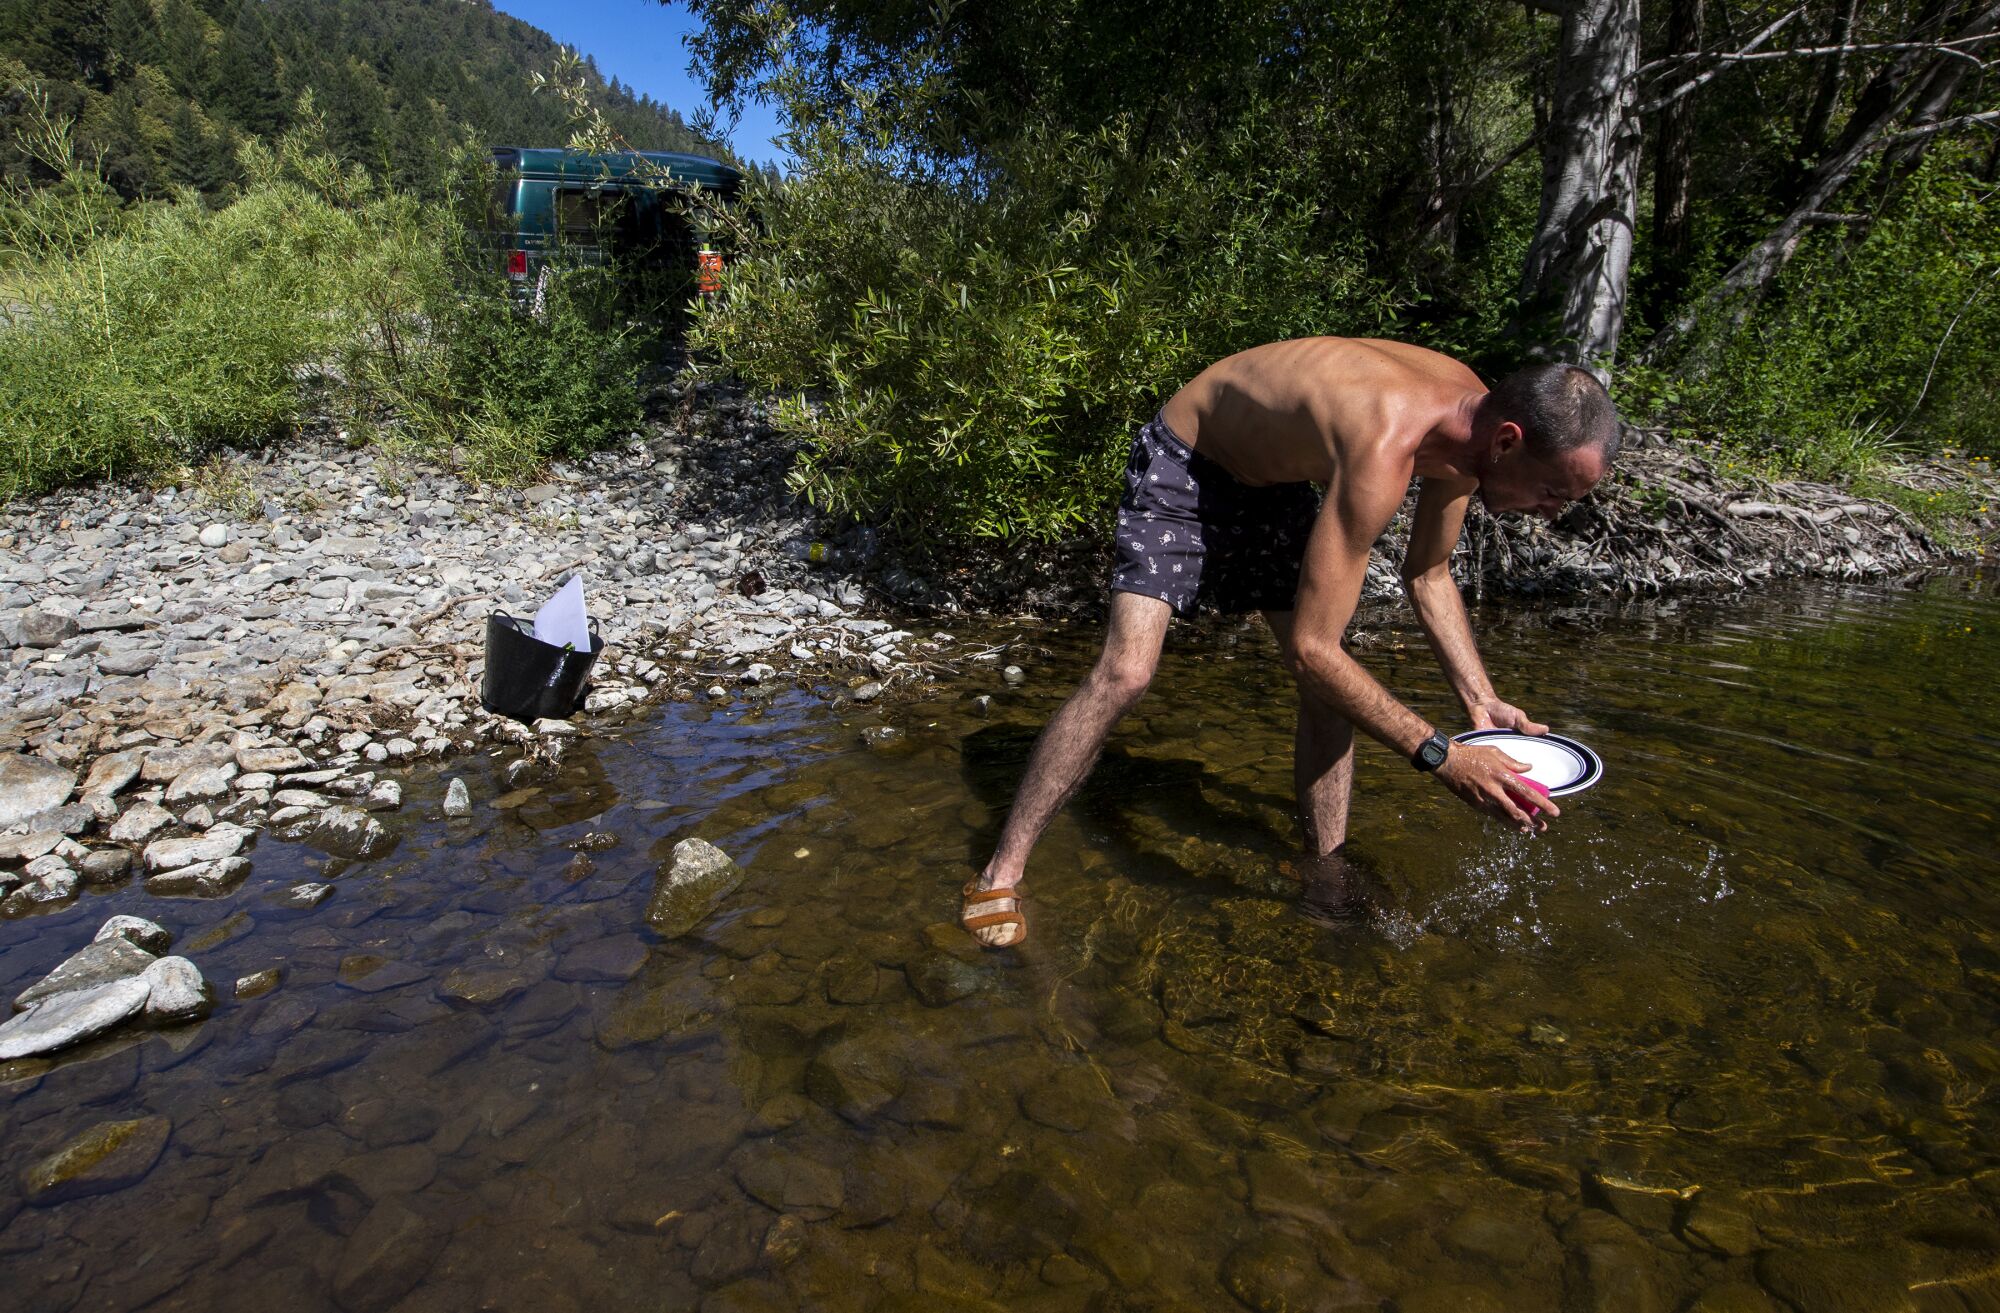 Cristiano washes dishes in the Eel River.